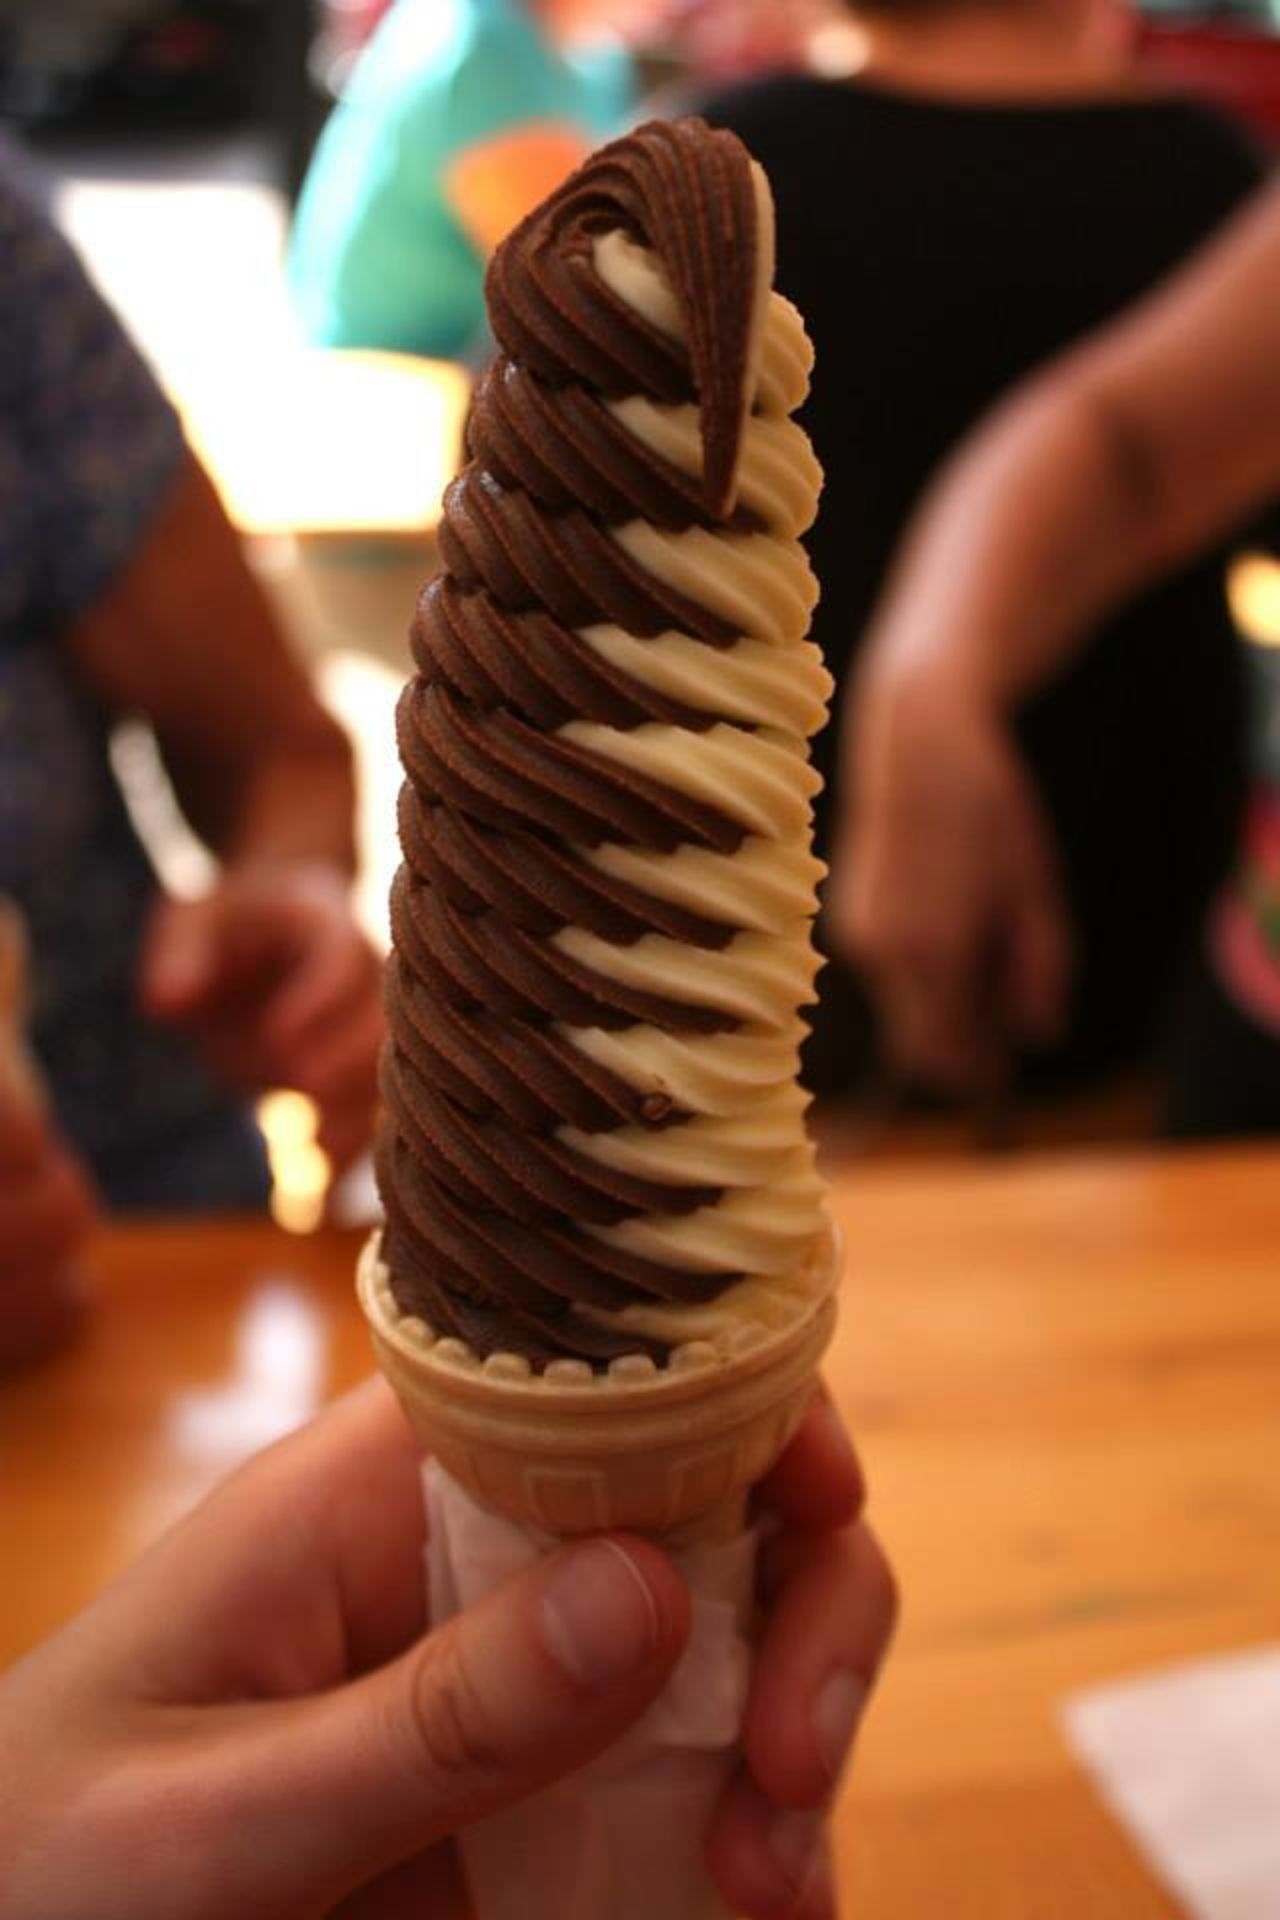 <strong>16. Ice cream: </strong>Poles love their ice cream, which they call "lody." Whether it's soft serve, gelato or the traditional variety, you're likely to find an ice cream shop every few blocks in Poland.